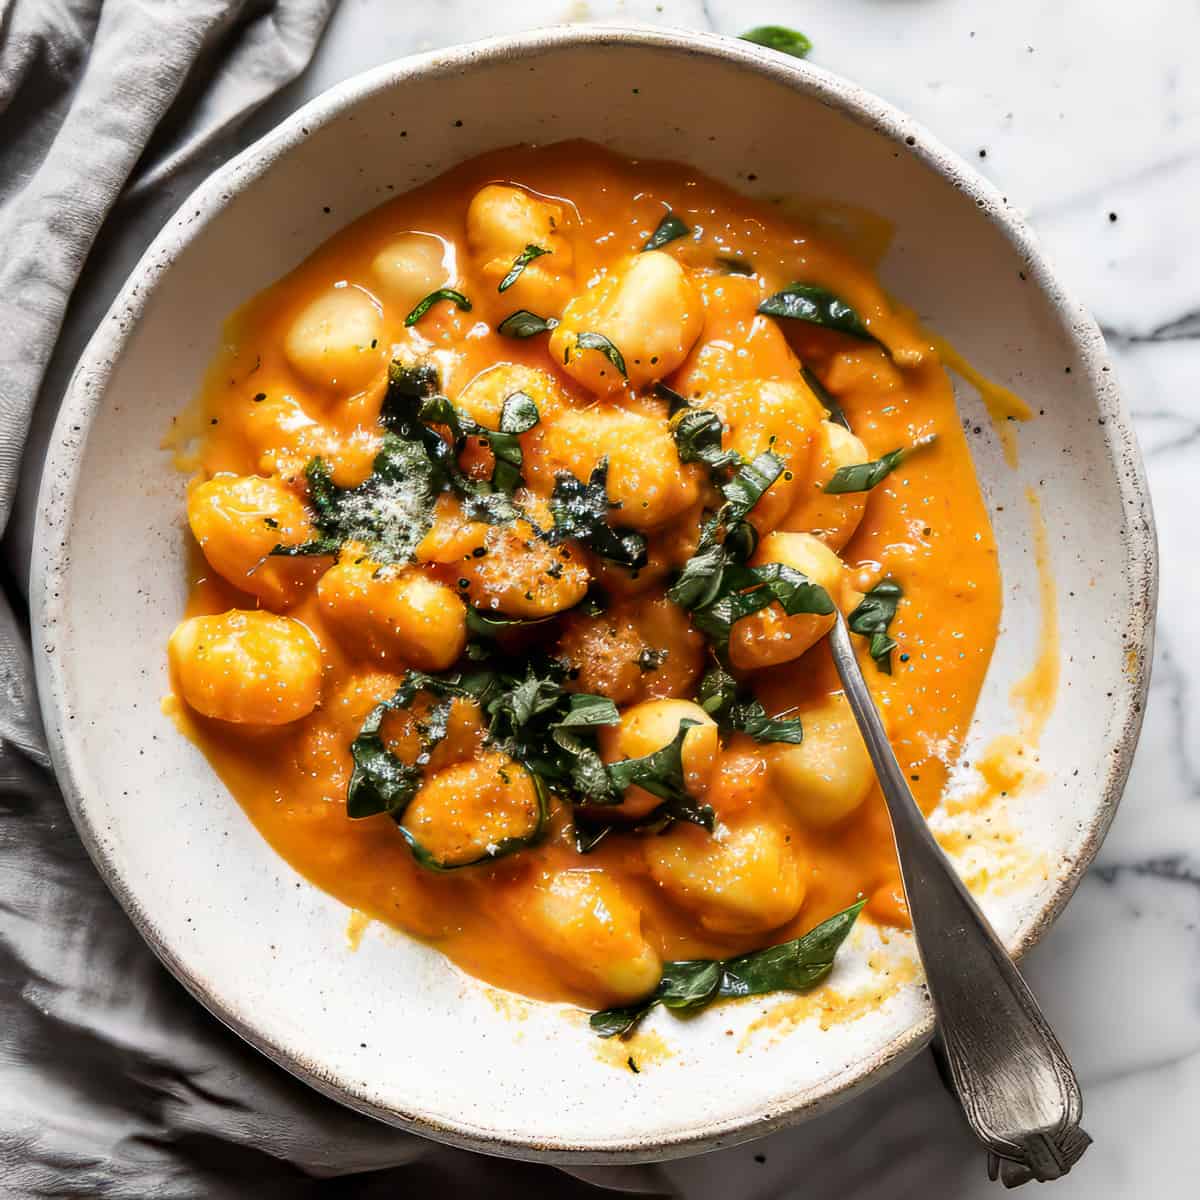 Butternut squash gnocchi with chopped herbs in a white bowl.